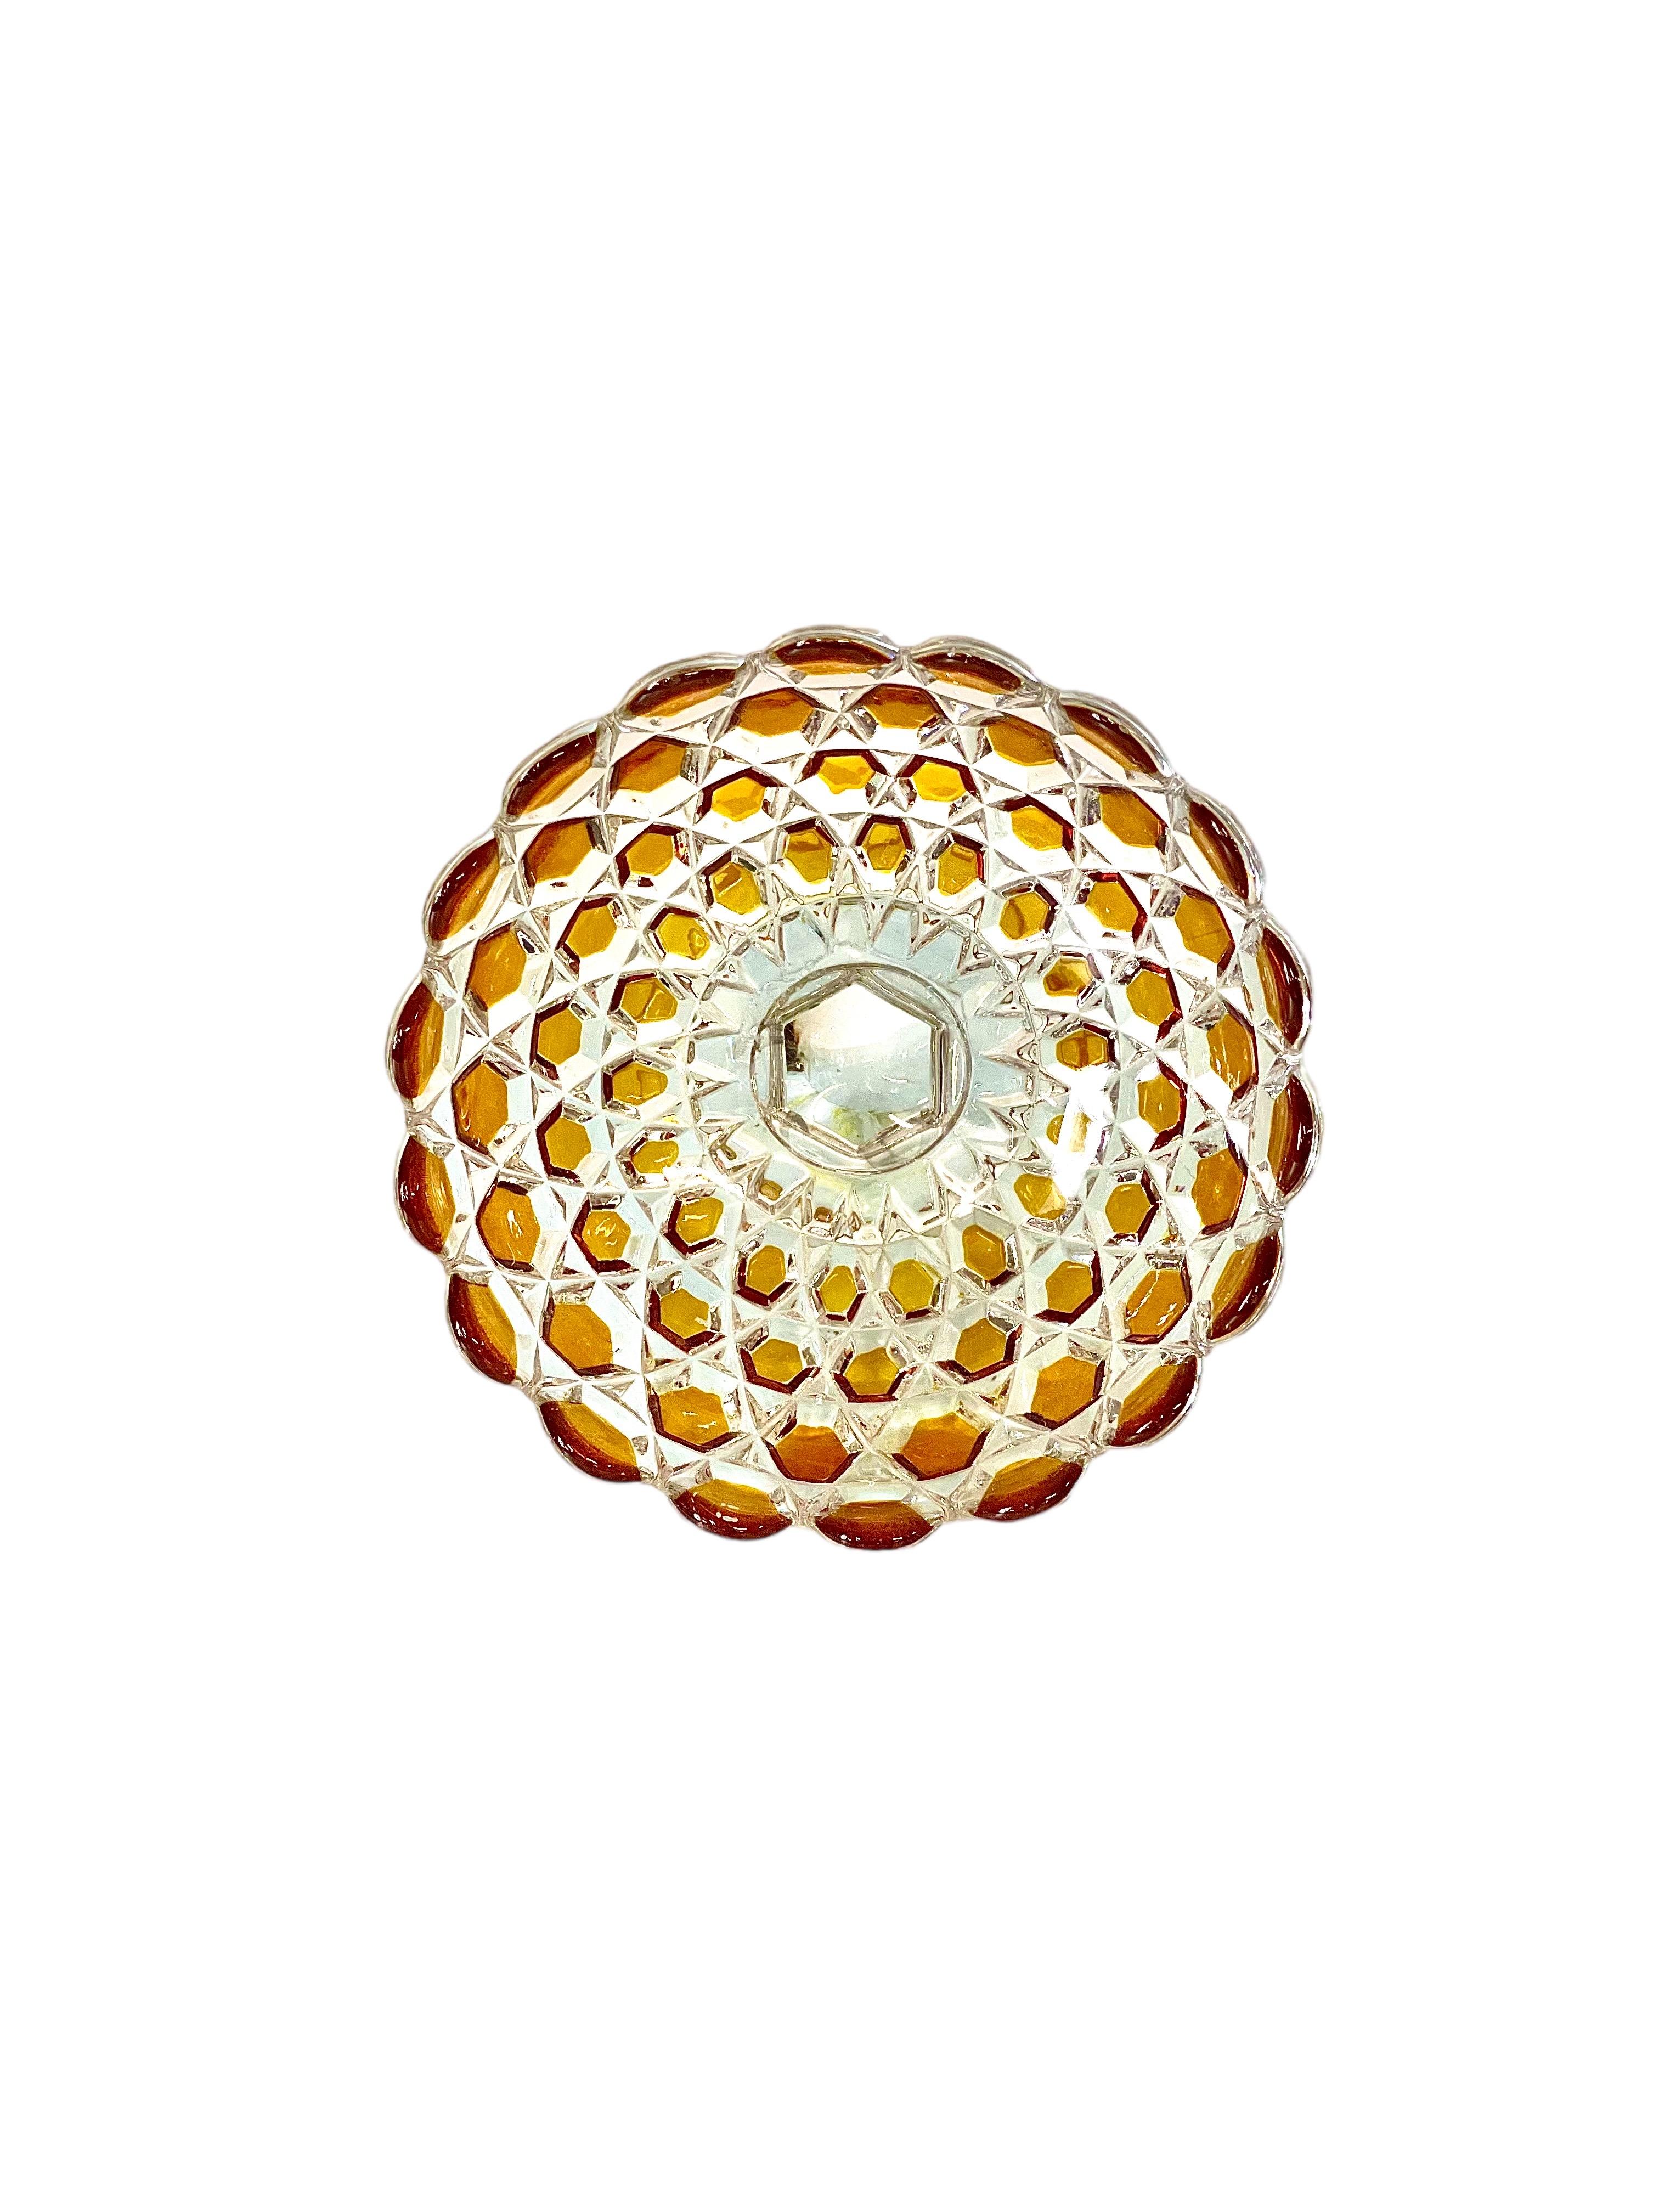 A vintage cut-crystal candy dish, or bonbonnière, featuring two-tone transparent and amber- coloured diamond-cut motifs with a highly decorative scalloped rim. The dish, which dates from around the turn of the 20th century, sits atop a wonderfully